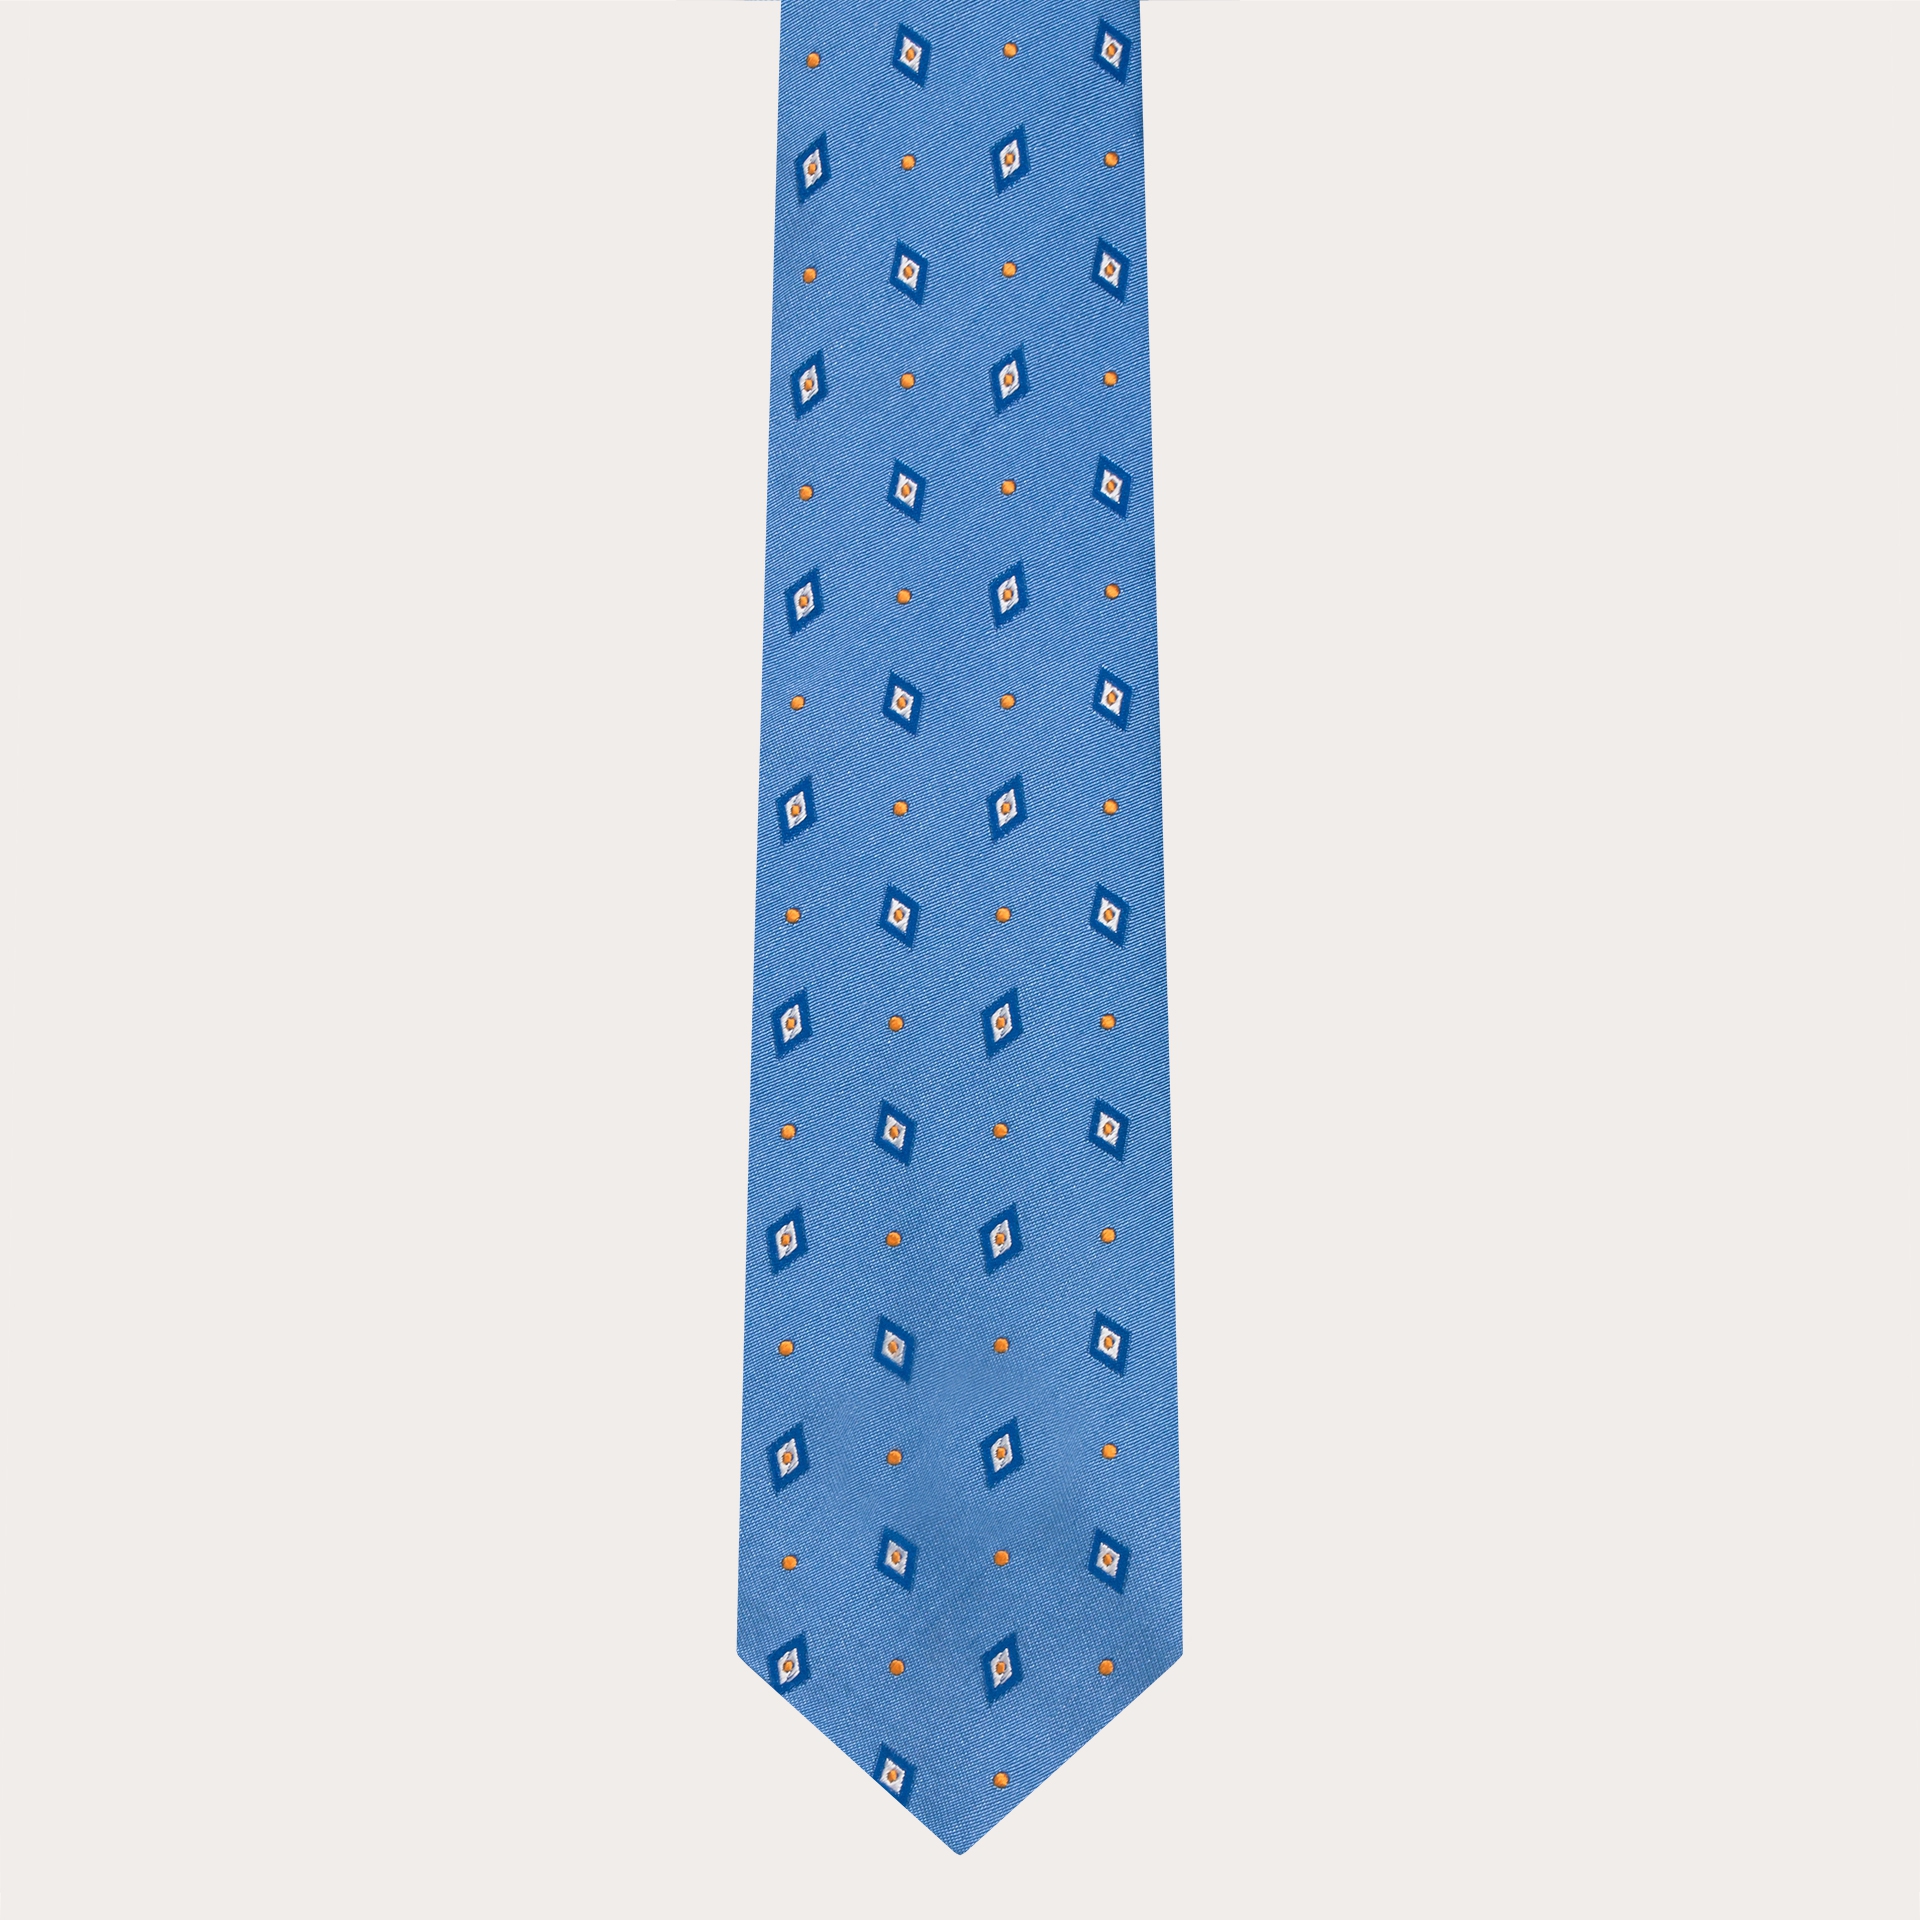 Jacquard silk tie for suit, light blue with blue and yellow diamonds and dots